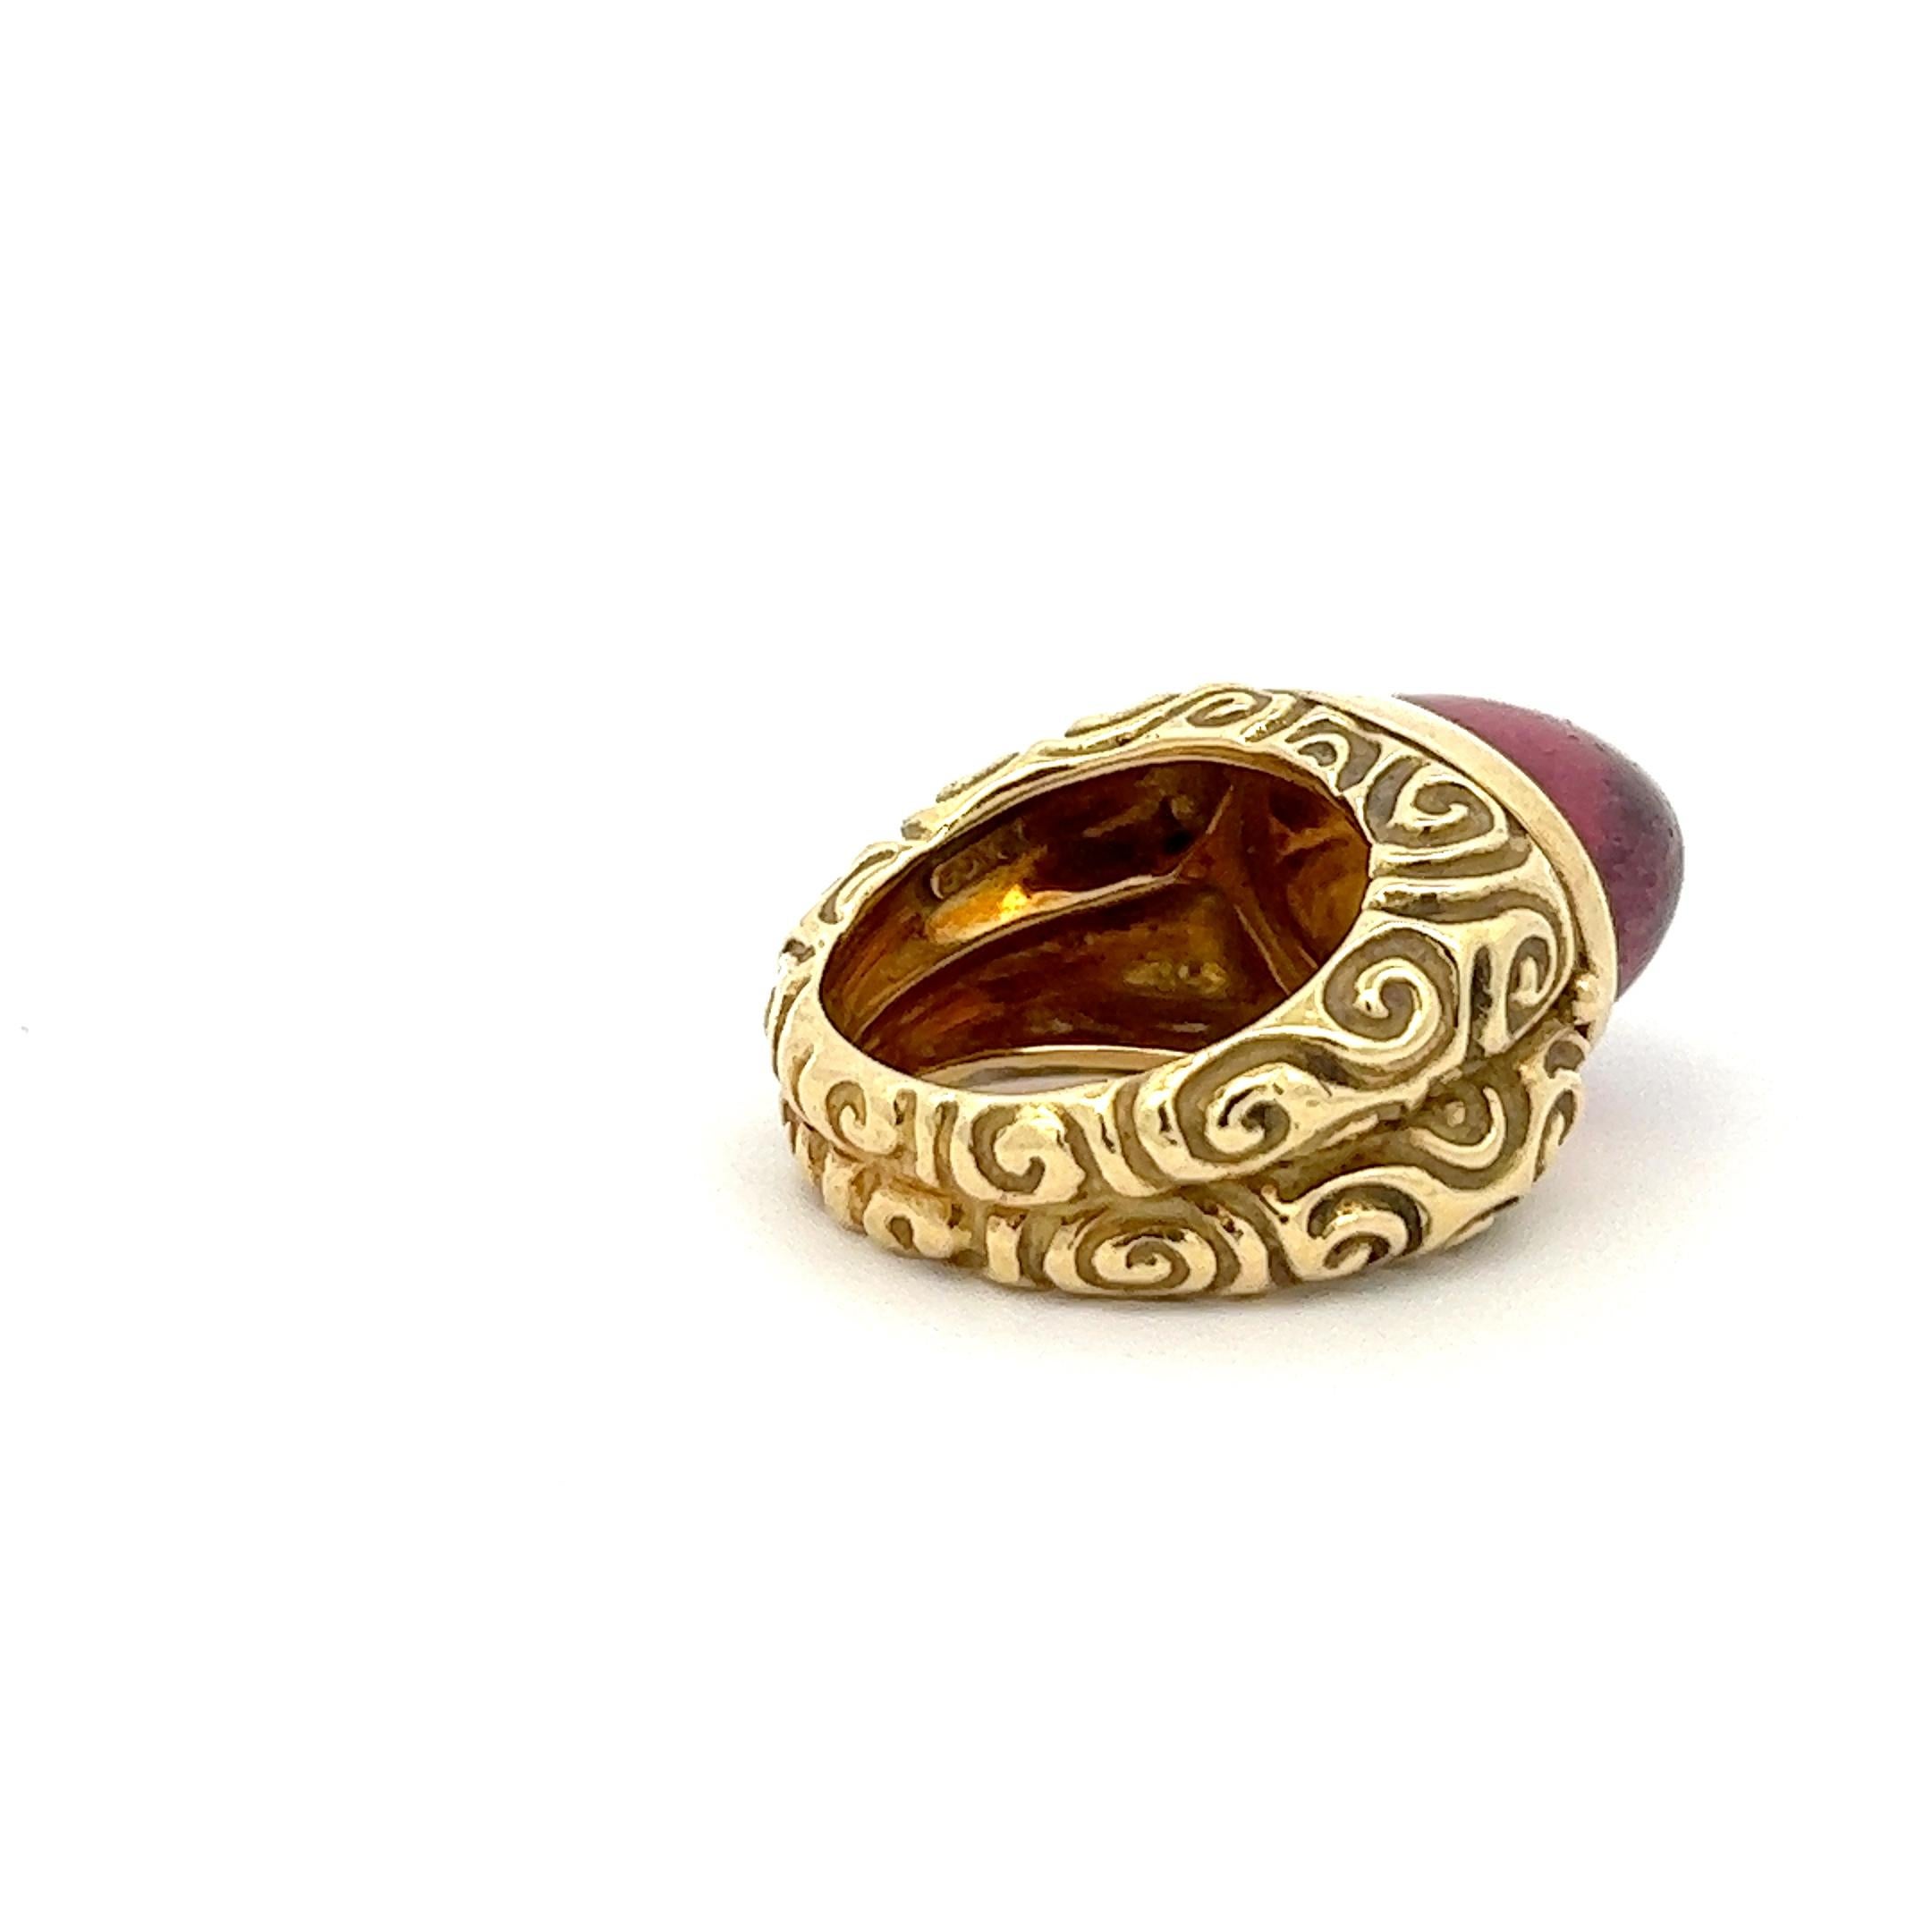 Cabochon An 18k yellow gold and pink Tourmaline ring By Elizabeth Gage. For Sale